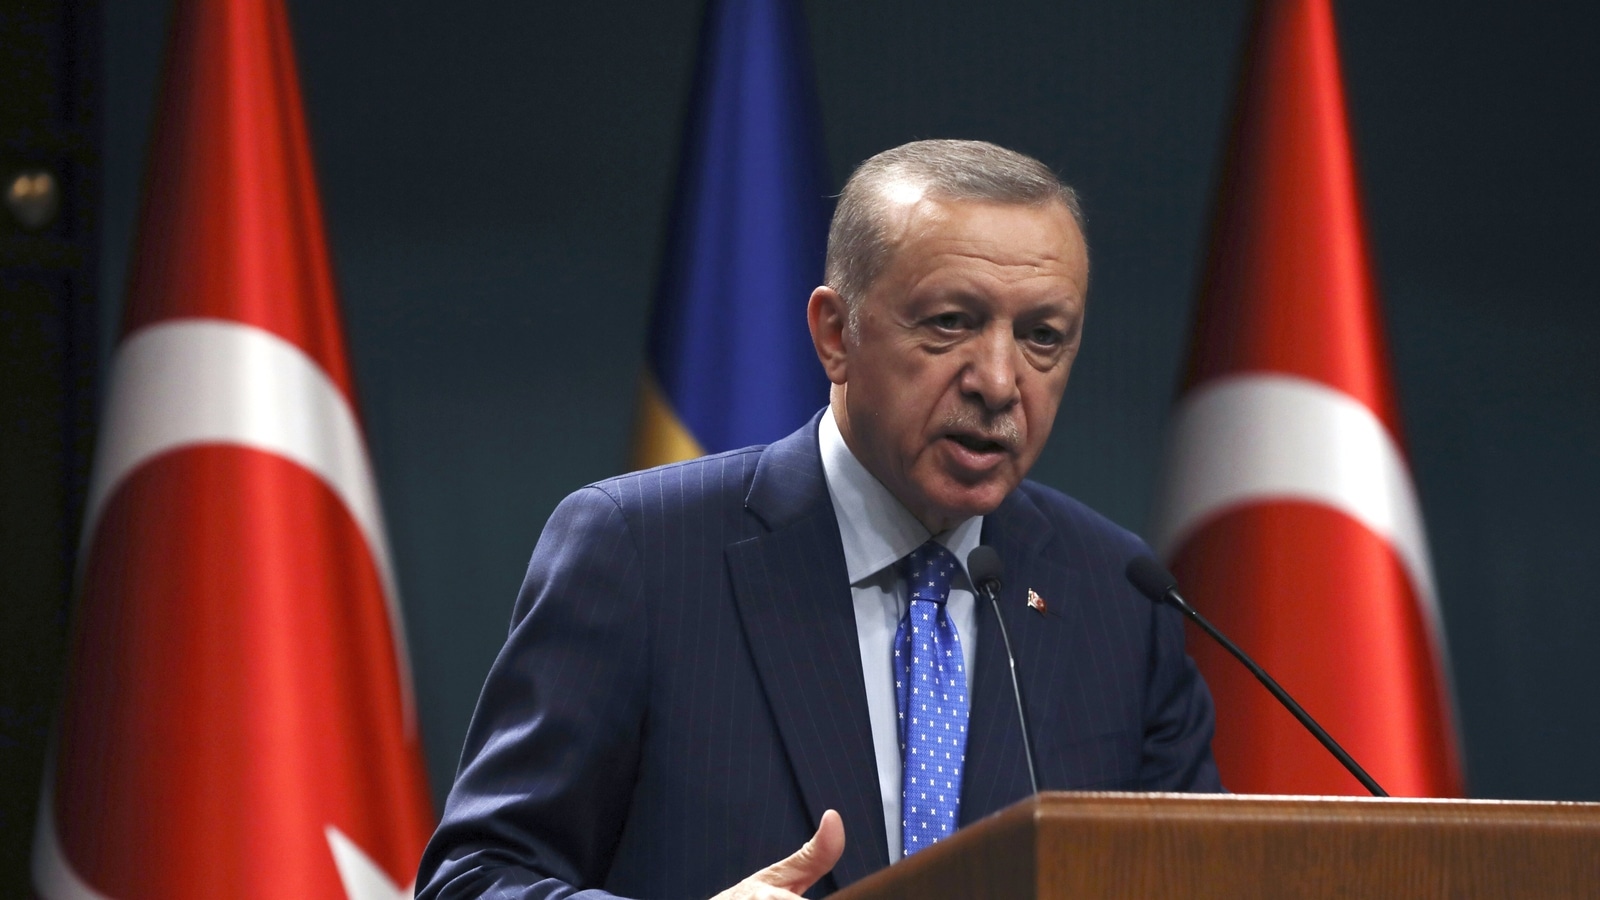 Turkey to hold parliamentary elections on May 14, says President Erdogan